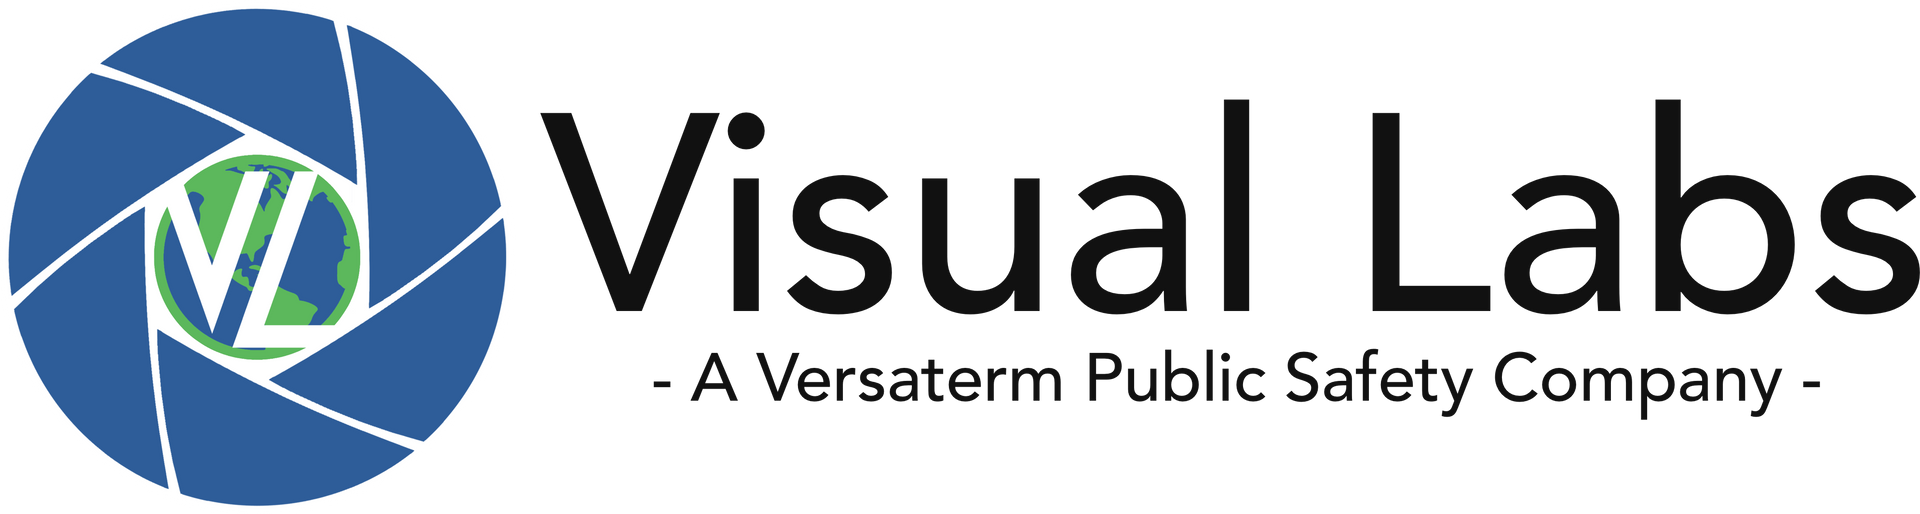 The logo for visual labs is a versatile public safety company.